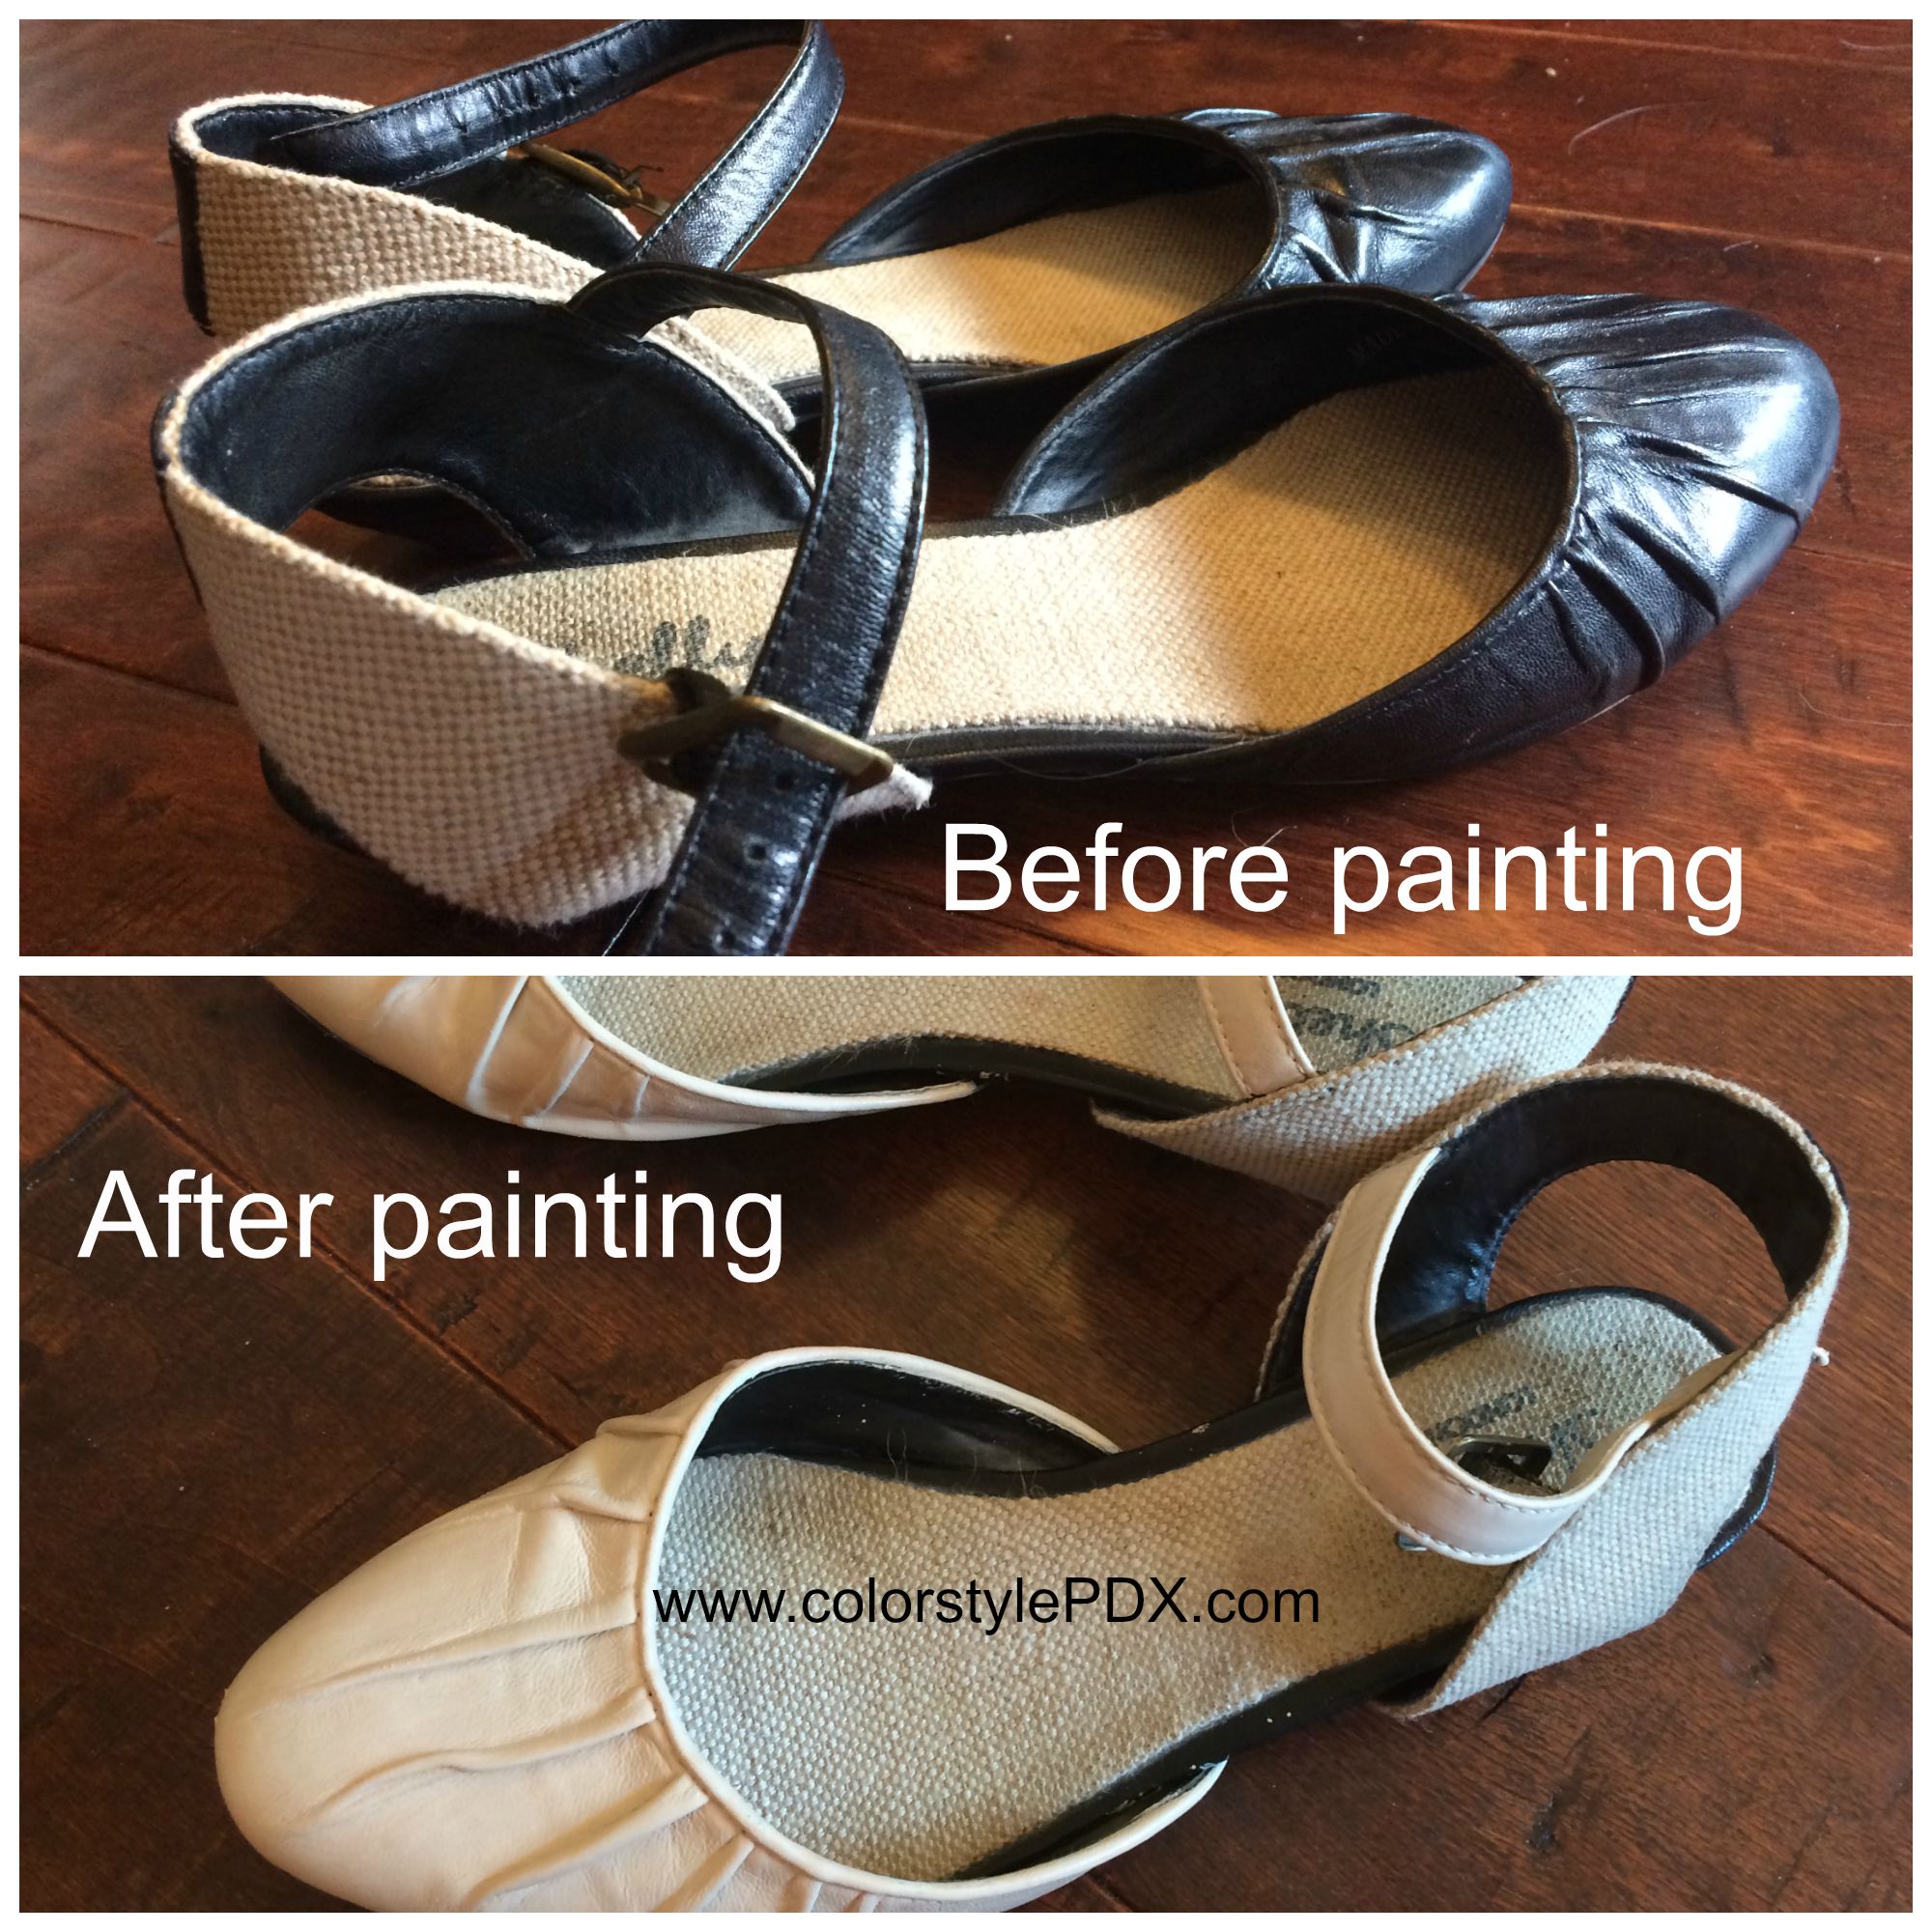 Love the shoes, but not the color? Paint them!